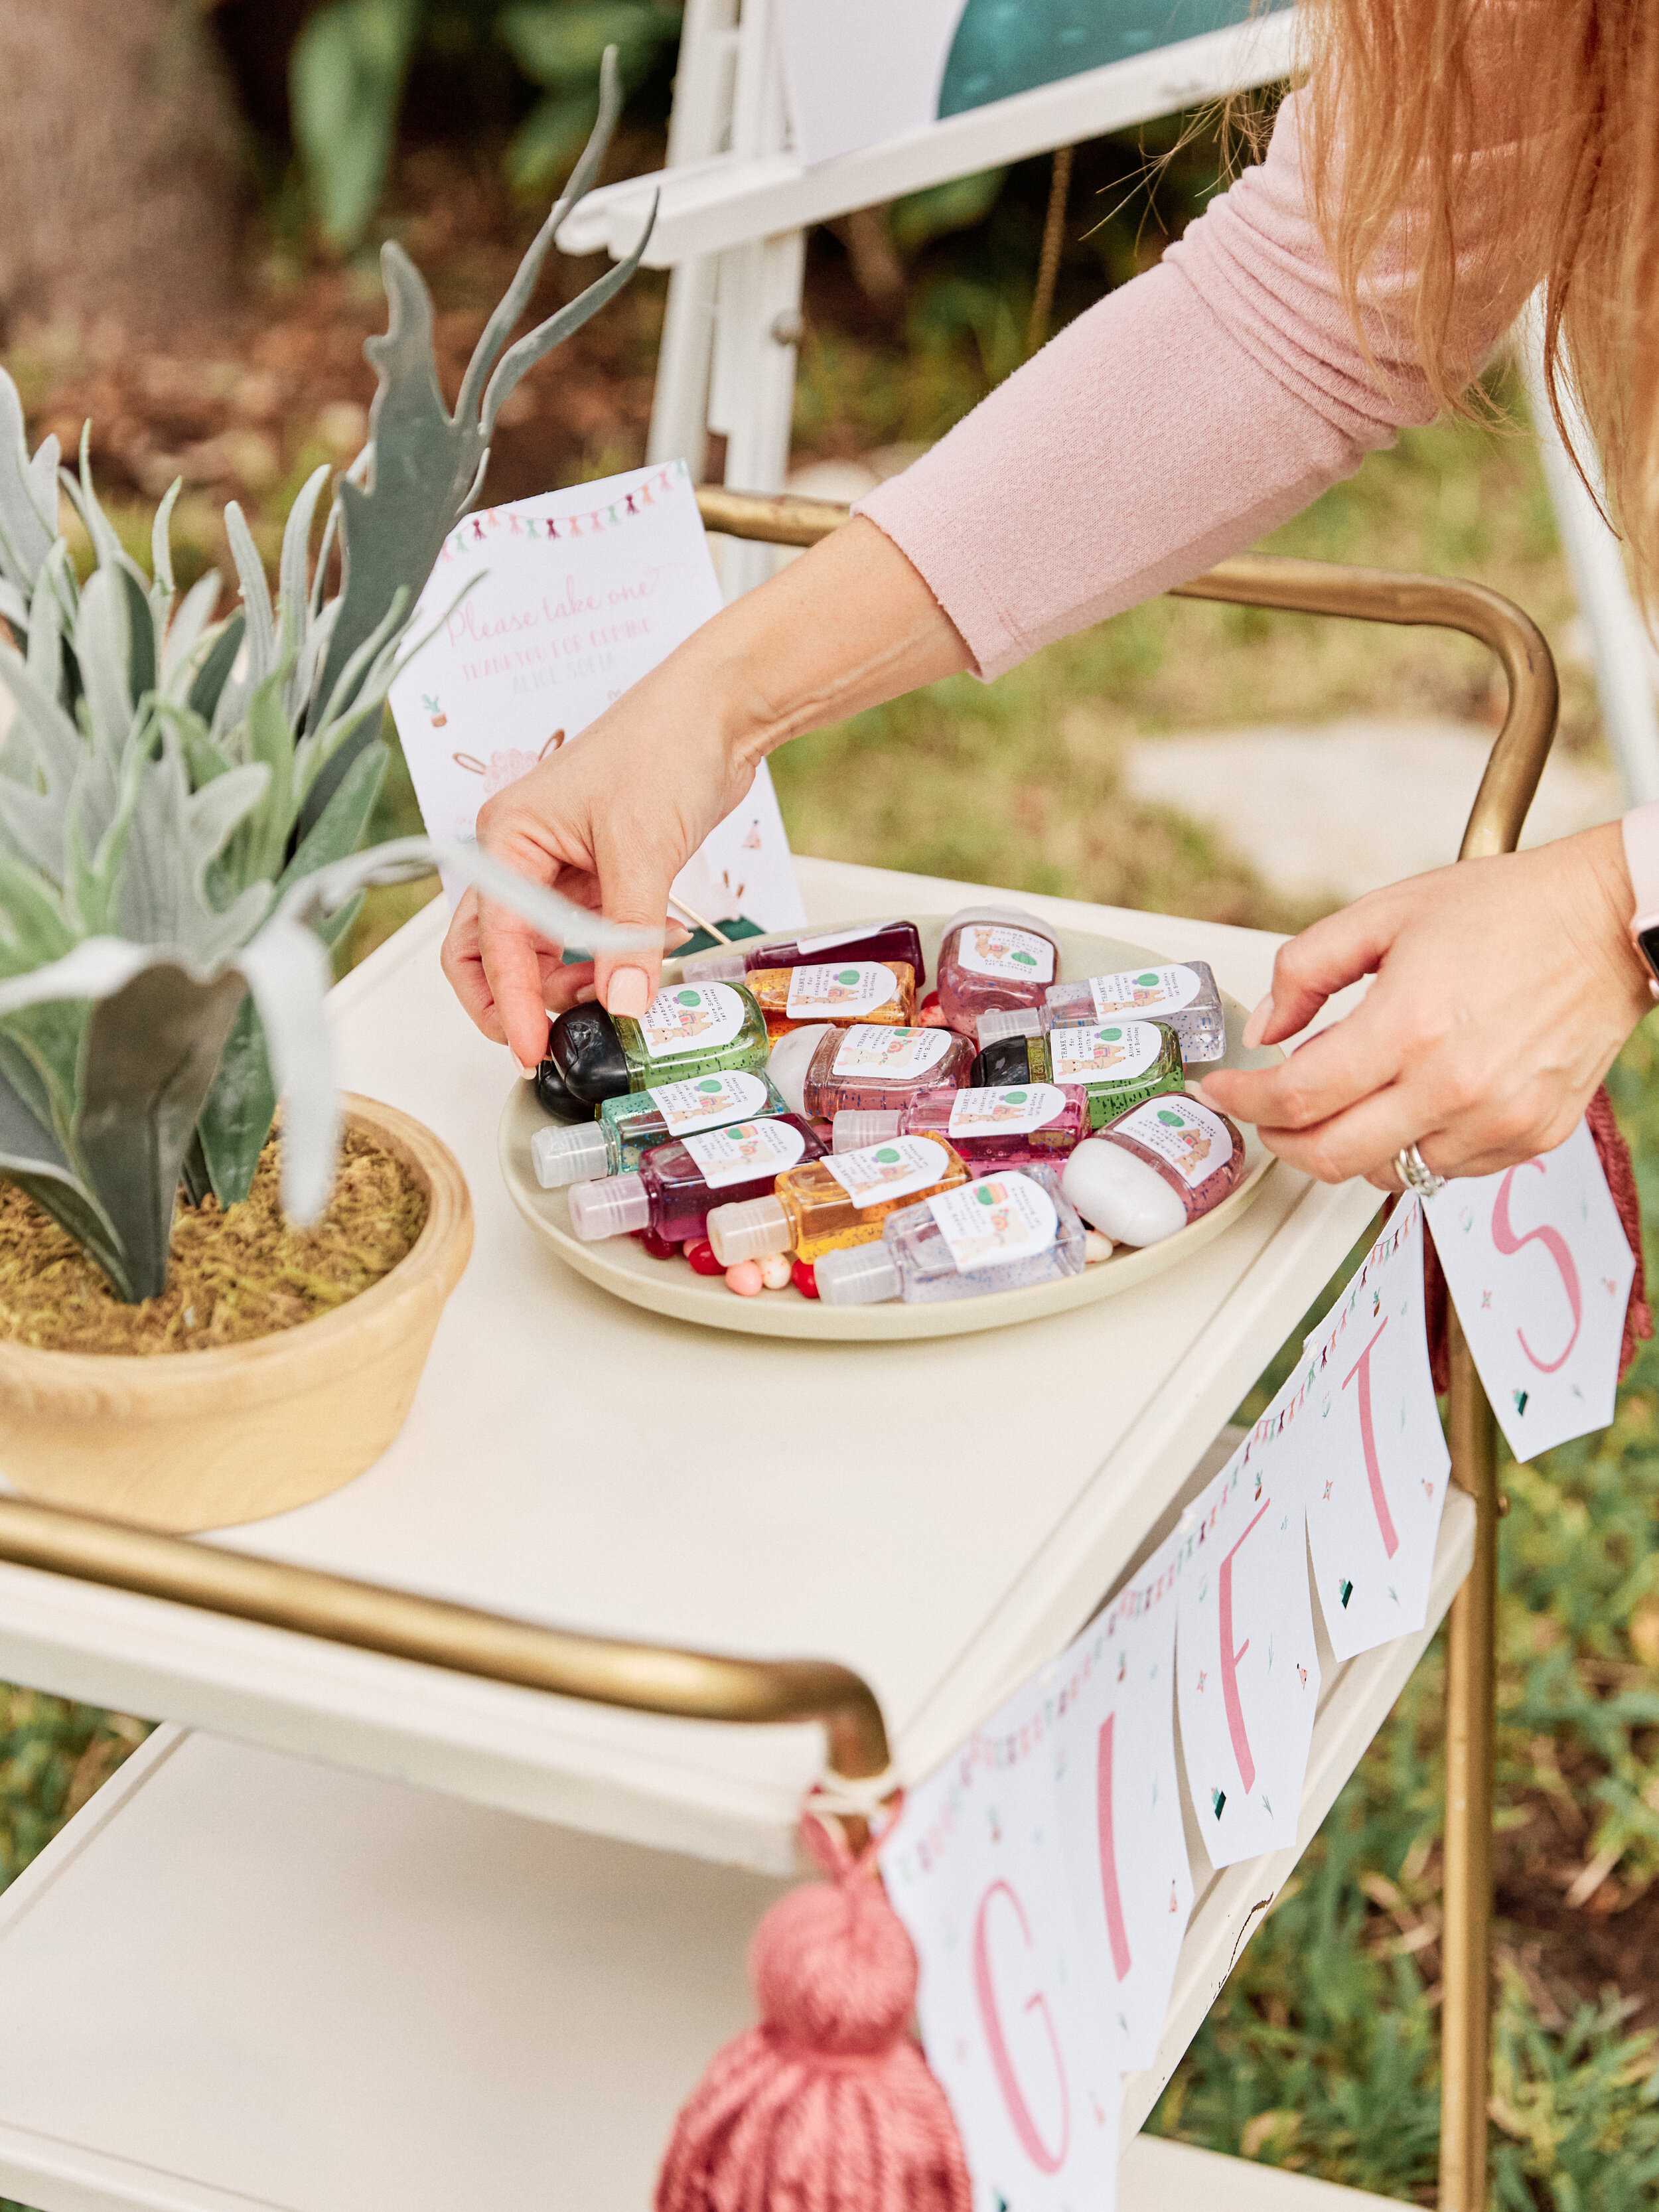 Llama Picnic Party Sanitizer Station - get details and more party inspiration now at minteventdesign.com!